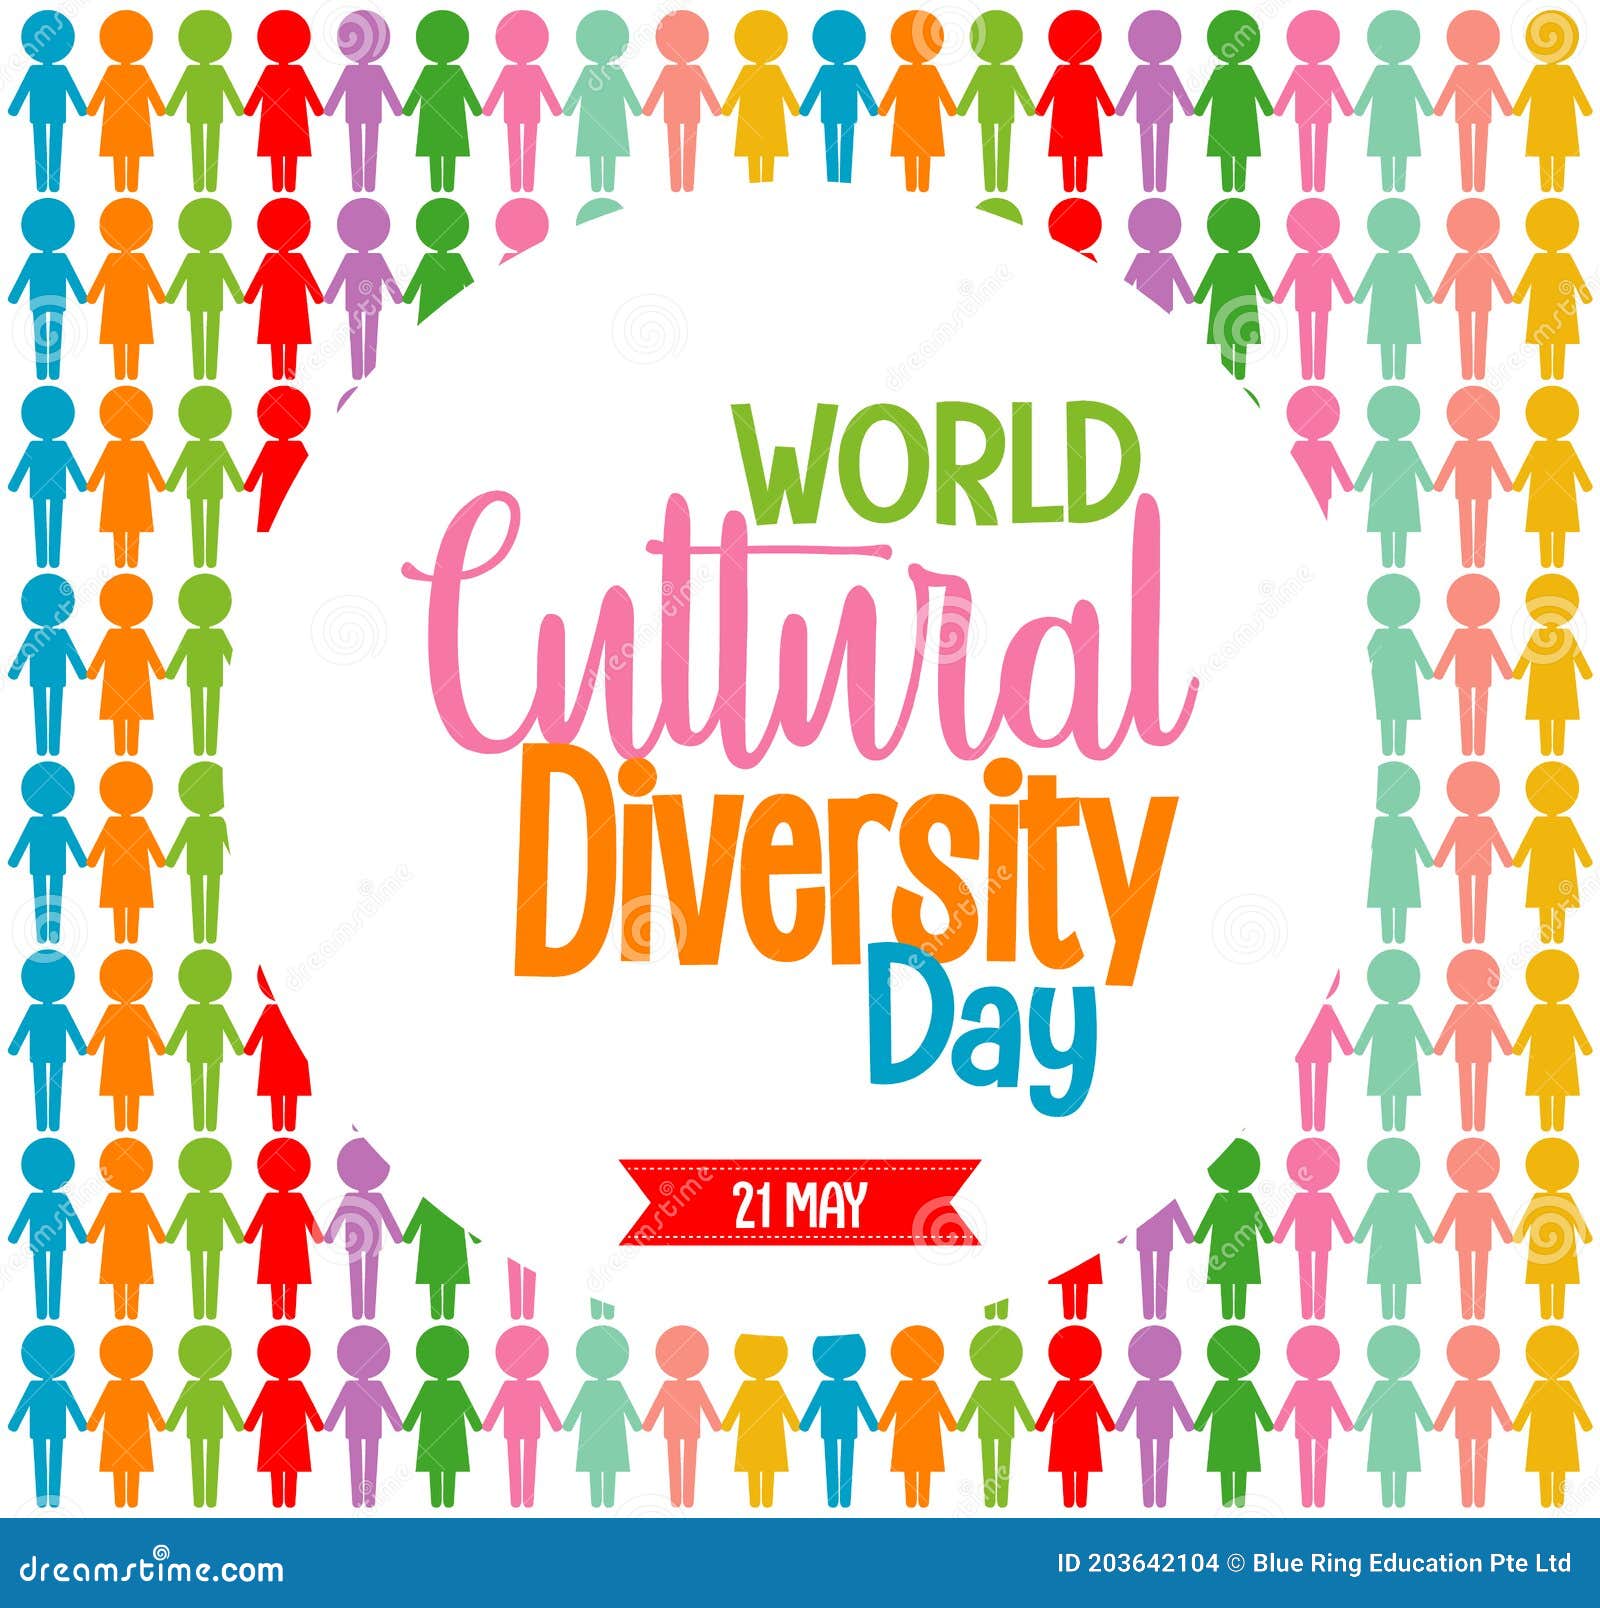 World Cultural Diversity Day Logo or Banner with Different Color People